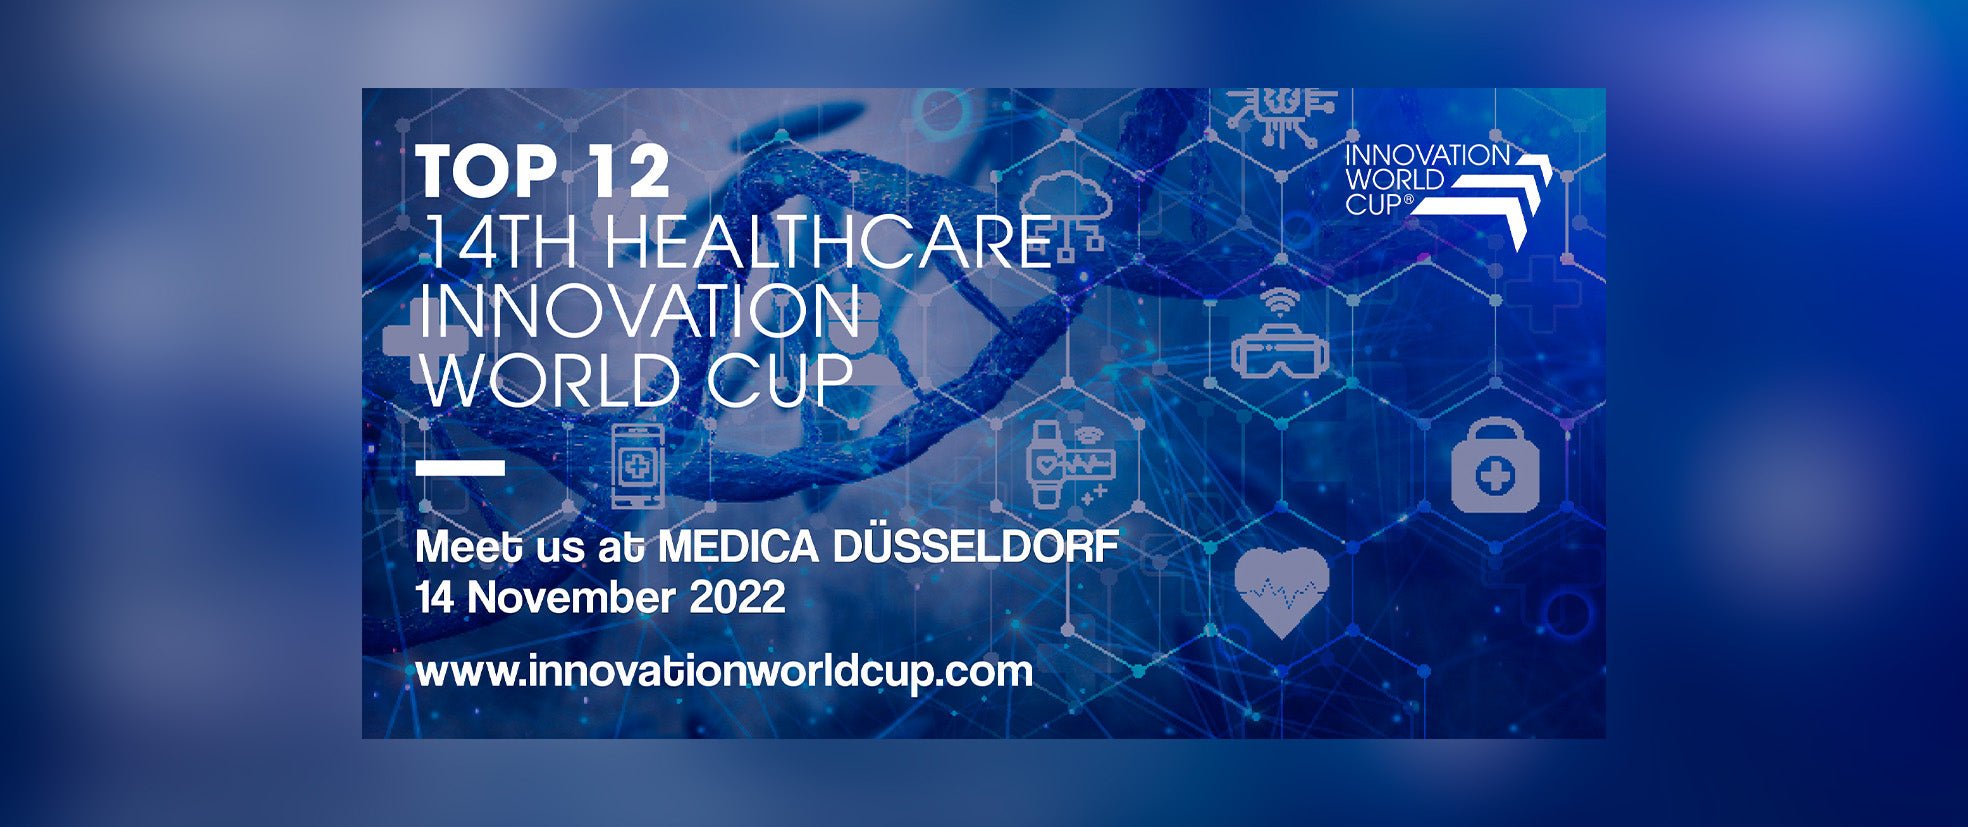 Mane Biotech makes it to the finals of the Medica 14th Healthcare innovation World cup for Technpreneurs! niostem